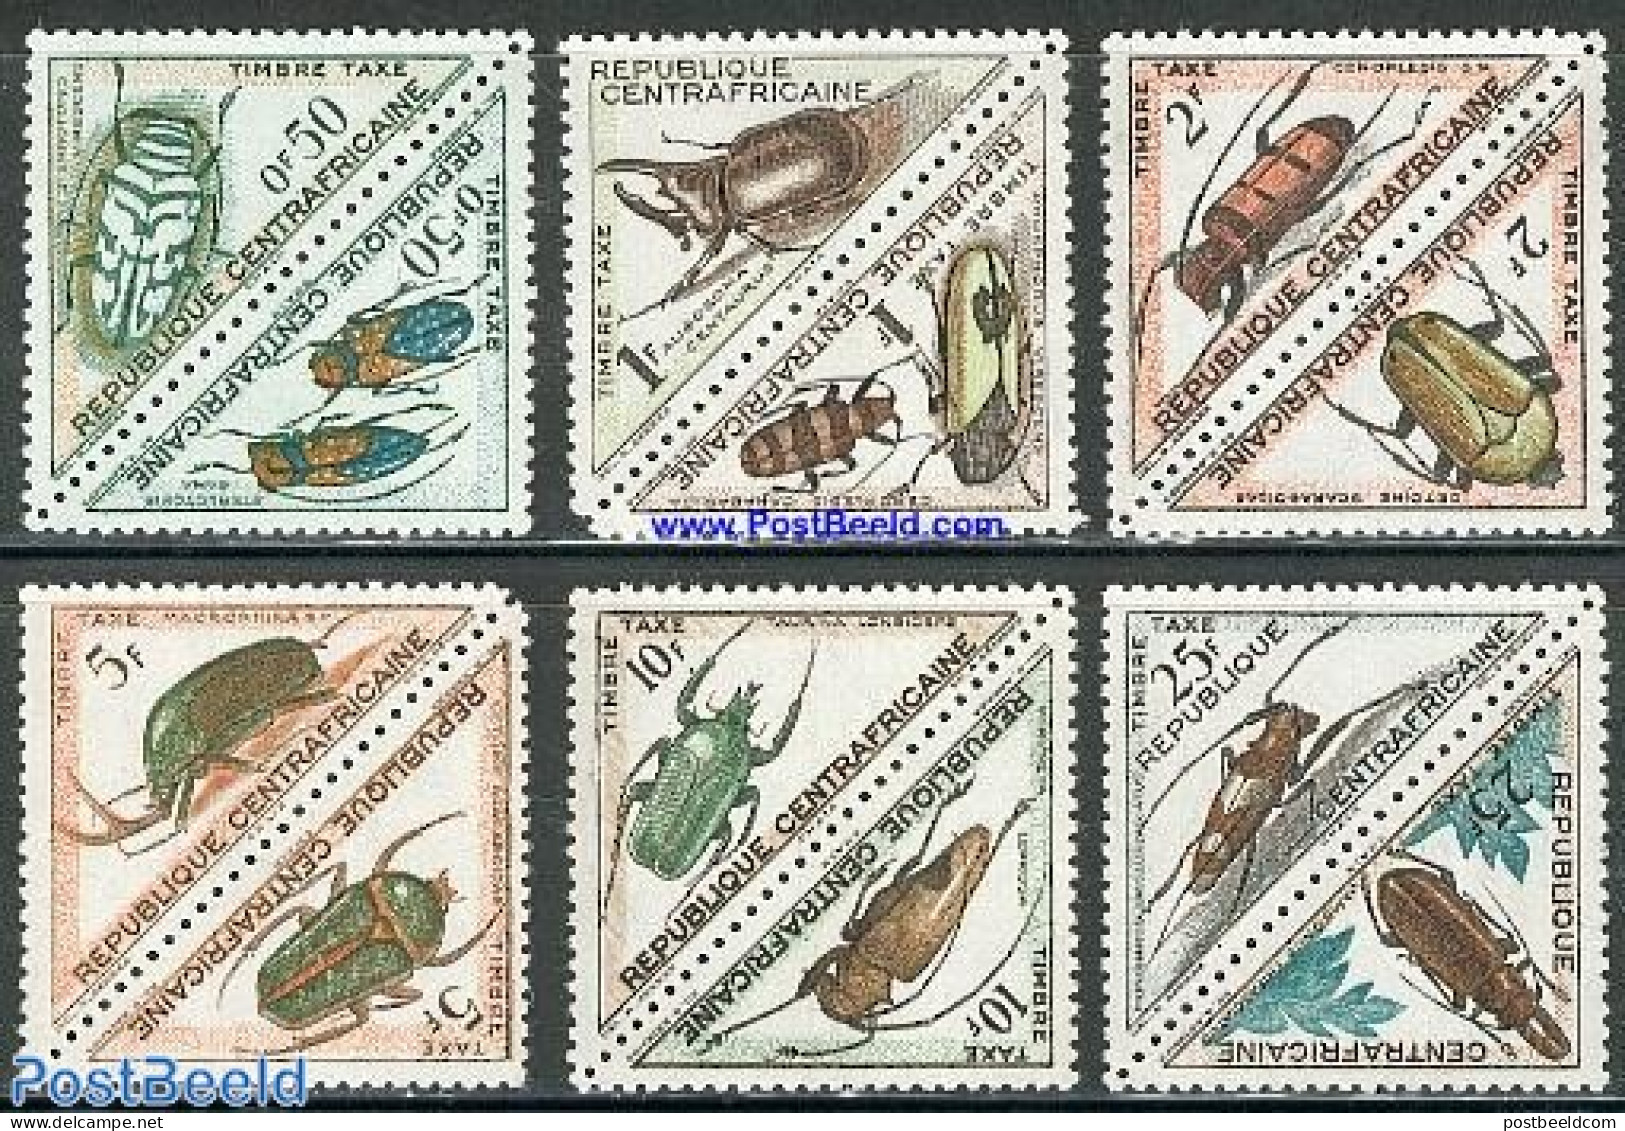 Central Africa 1962 Postage Due, Insects 12v (6x[:]), Mint NH, Nature - Insects - Central African Republic